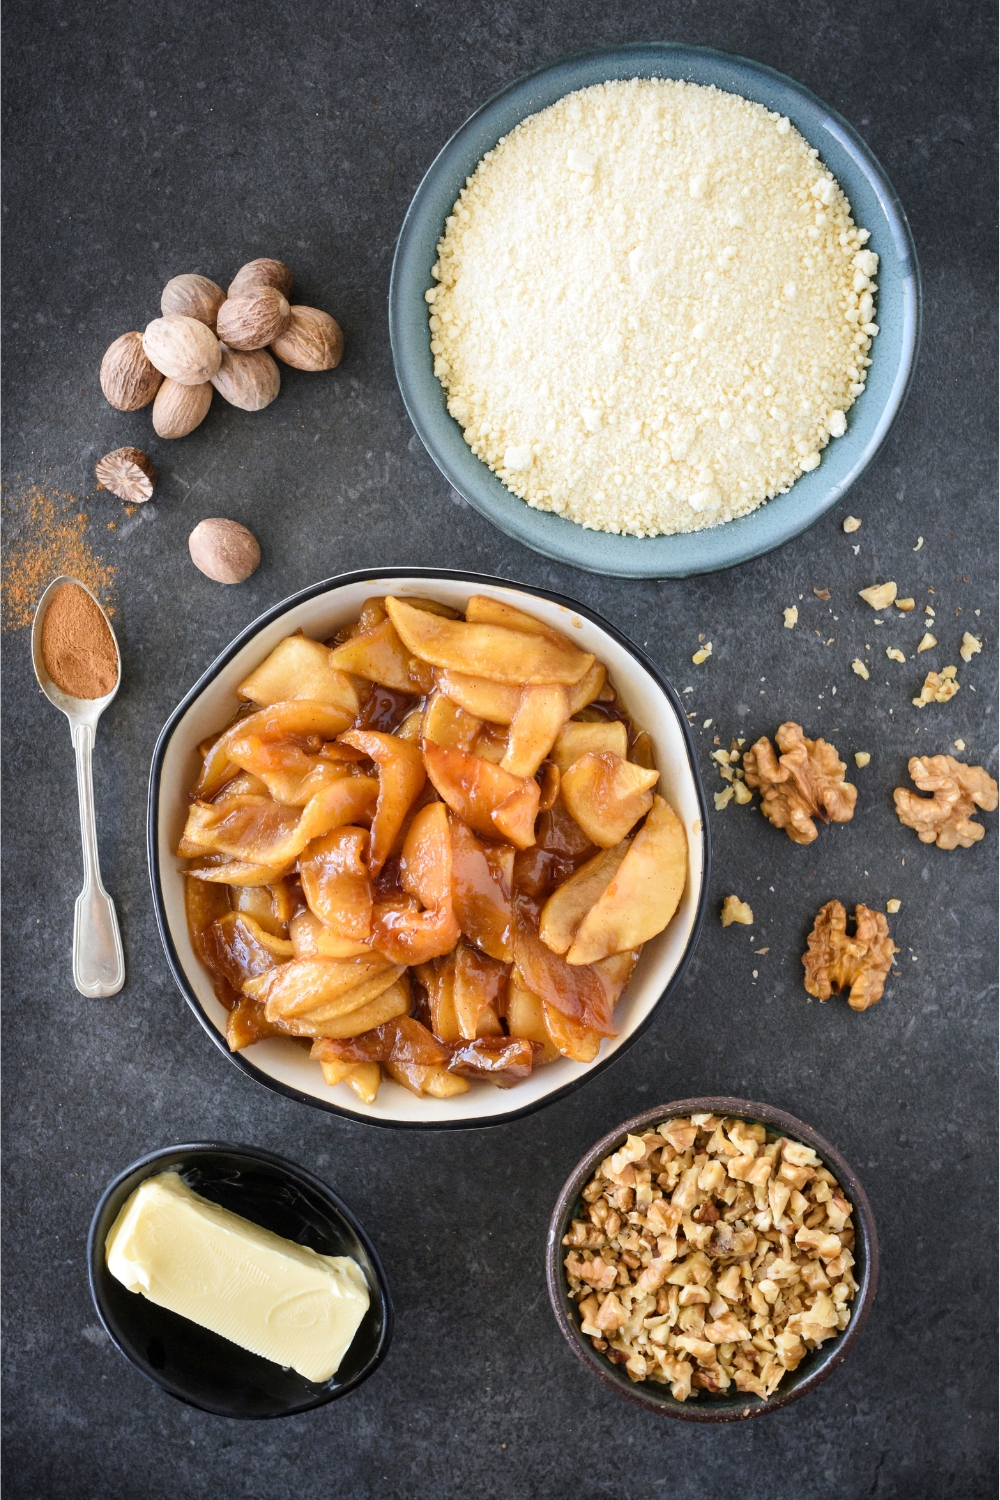 An assortment of ingredients including bowls of apple pie filling, cake mix, a butter stick, chopped nuts, a spoonful of cinnamon and a pile of nutmeg.